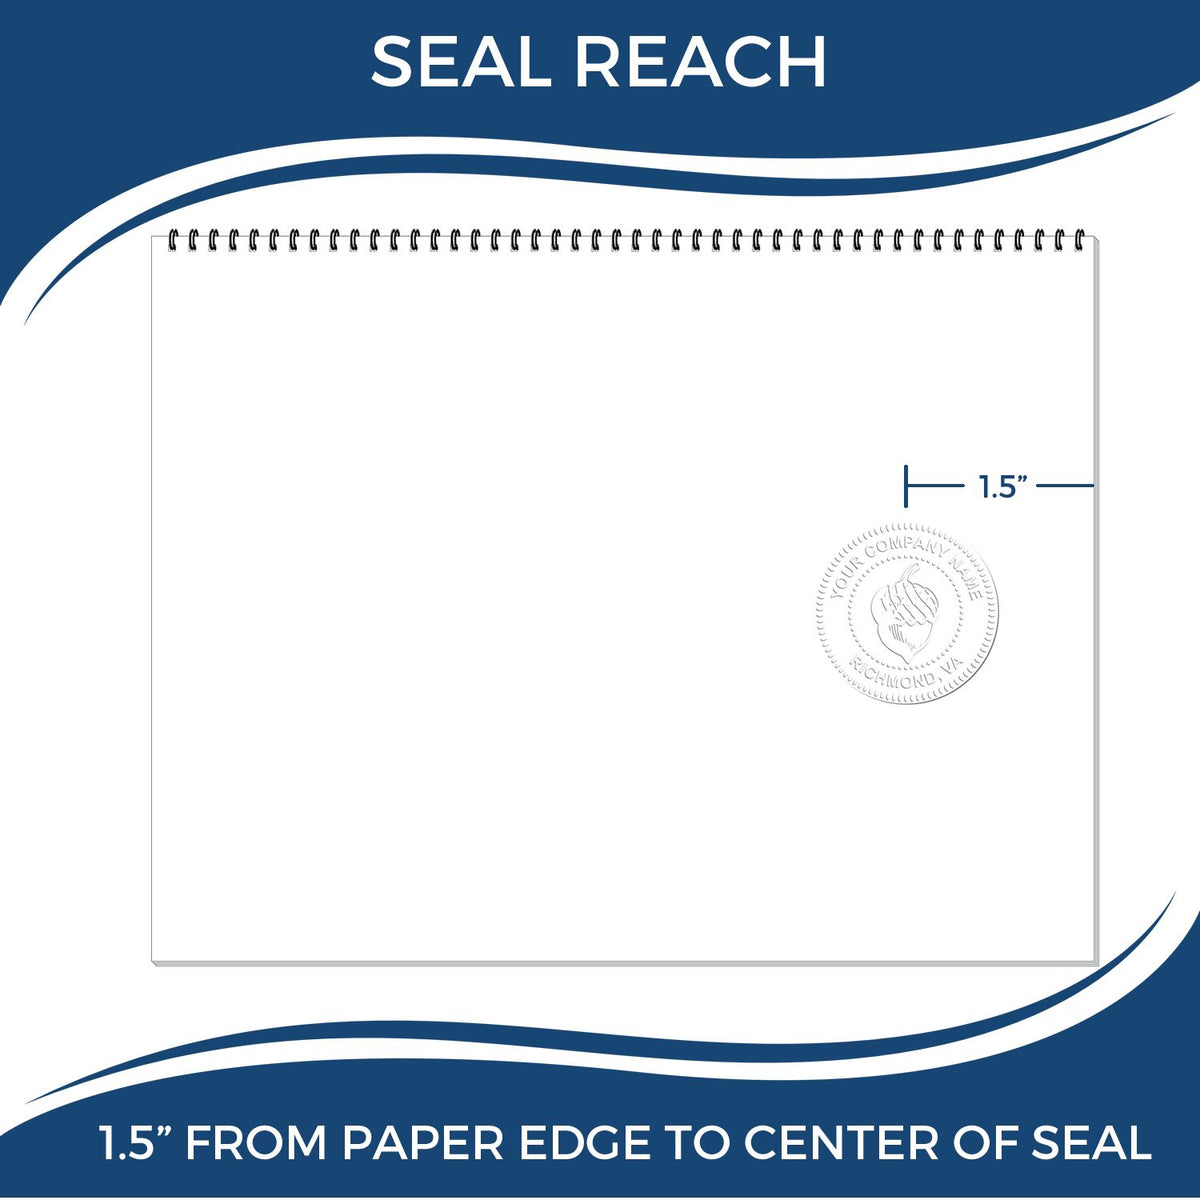 An infographic showing the seal reach which is represented by a ruler and a miniature seal image of the Handheld Arizona Architect Seal Embosser